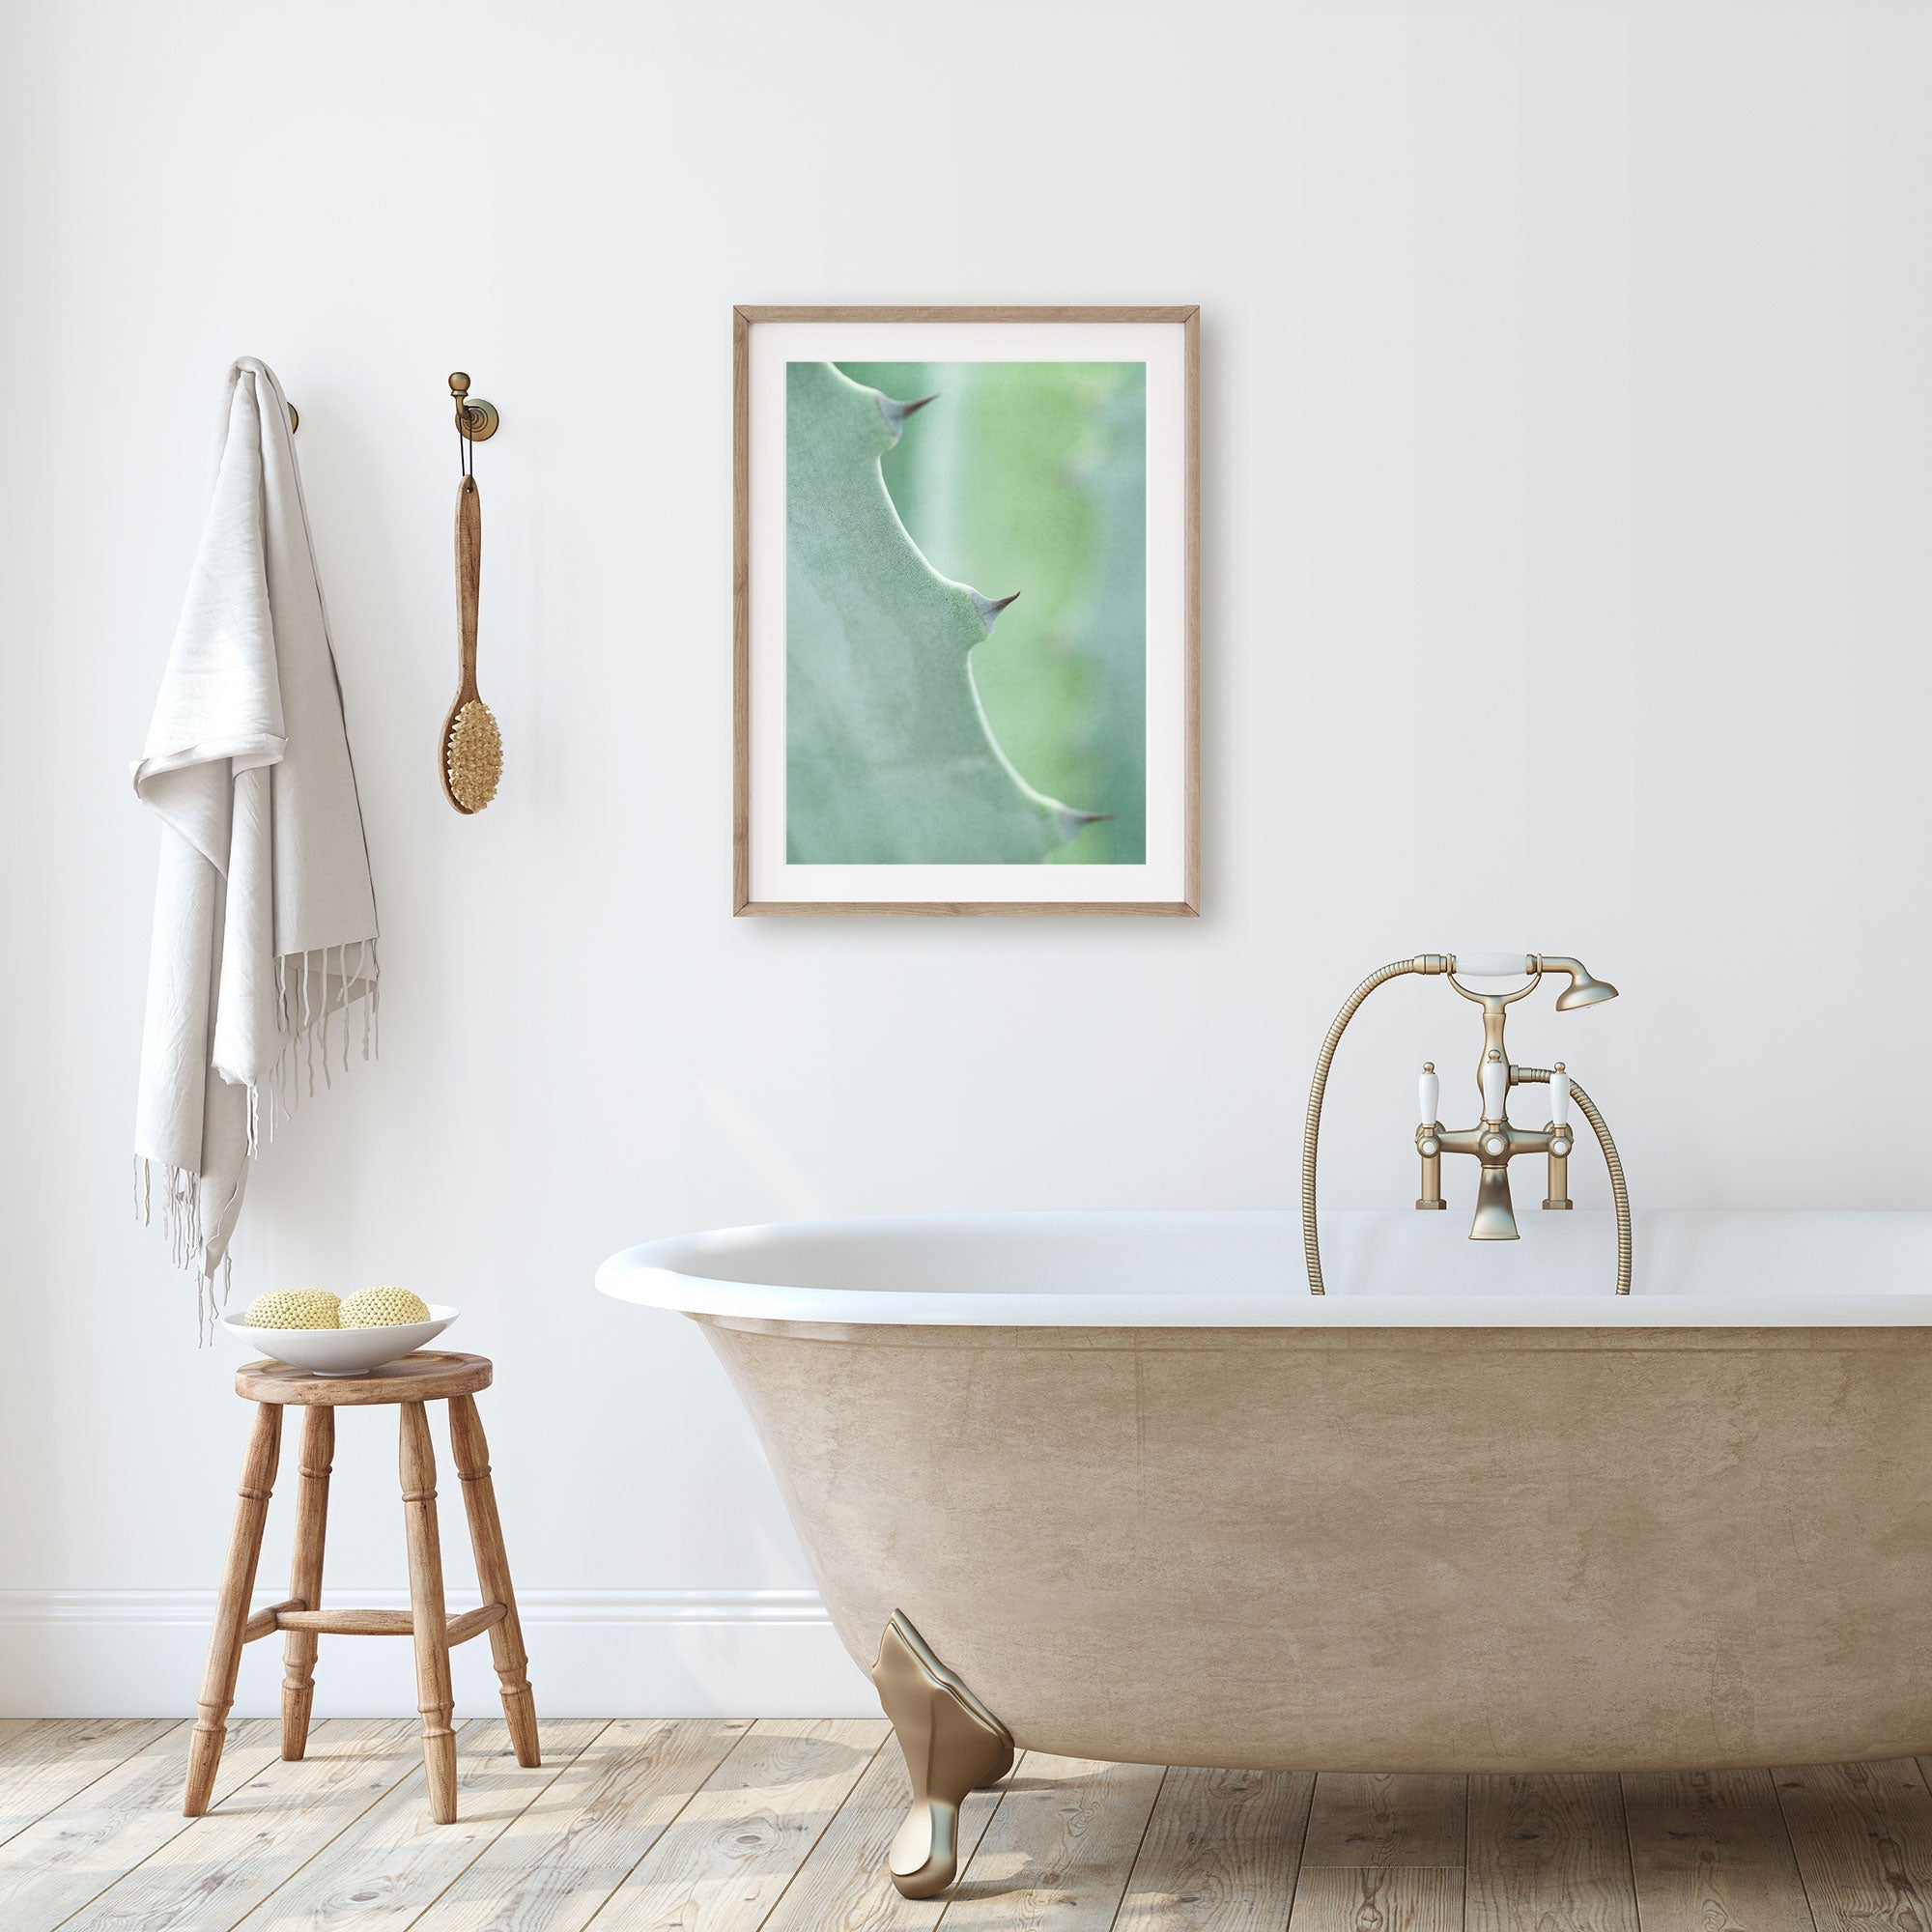 A minimalistic bathroom featuring a freestanding bathtub with golden claw feet, a wooden stool with bath items, a towel hanging on the wall, and Offley Green&#39;s &#39;Aloe Vera Spikes II&#39; unframed print above the tub.